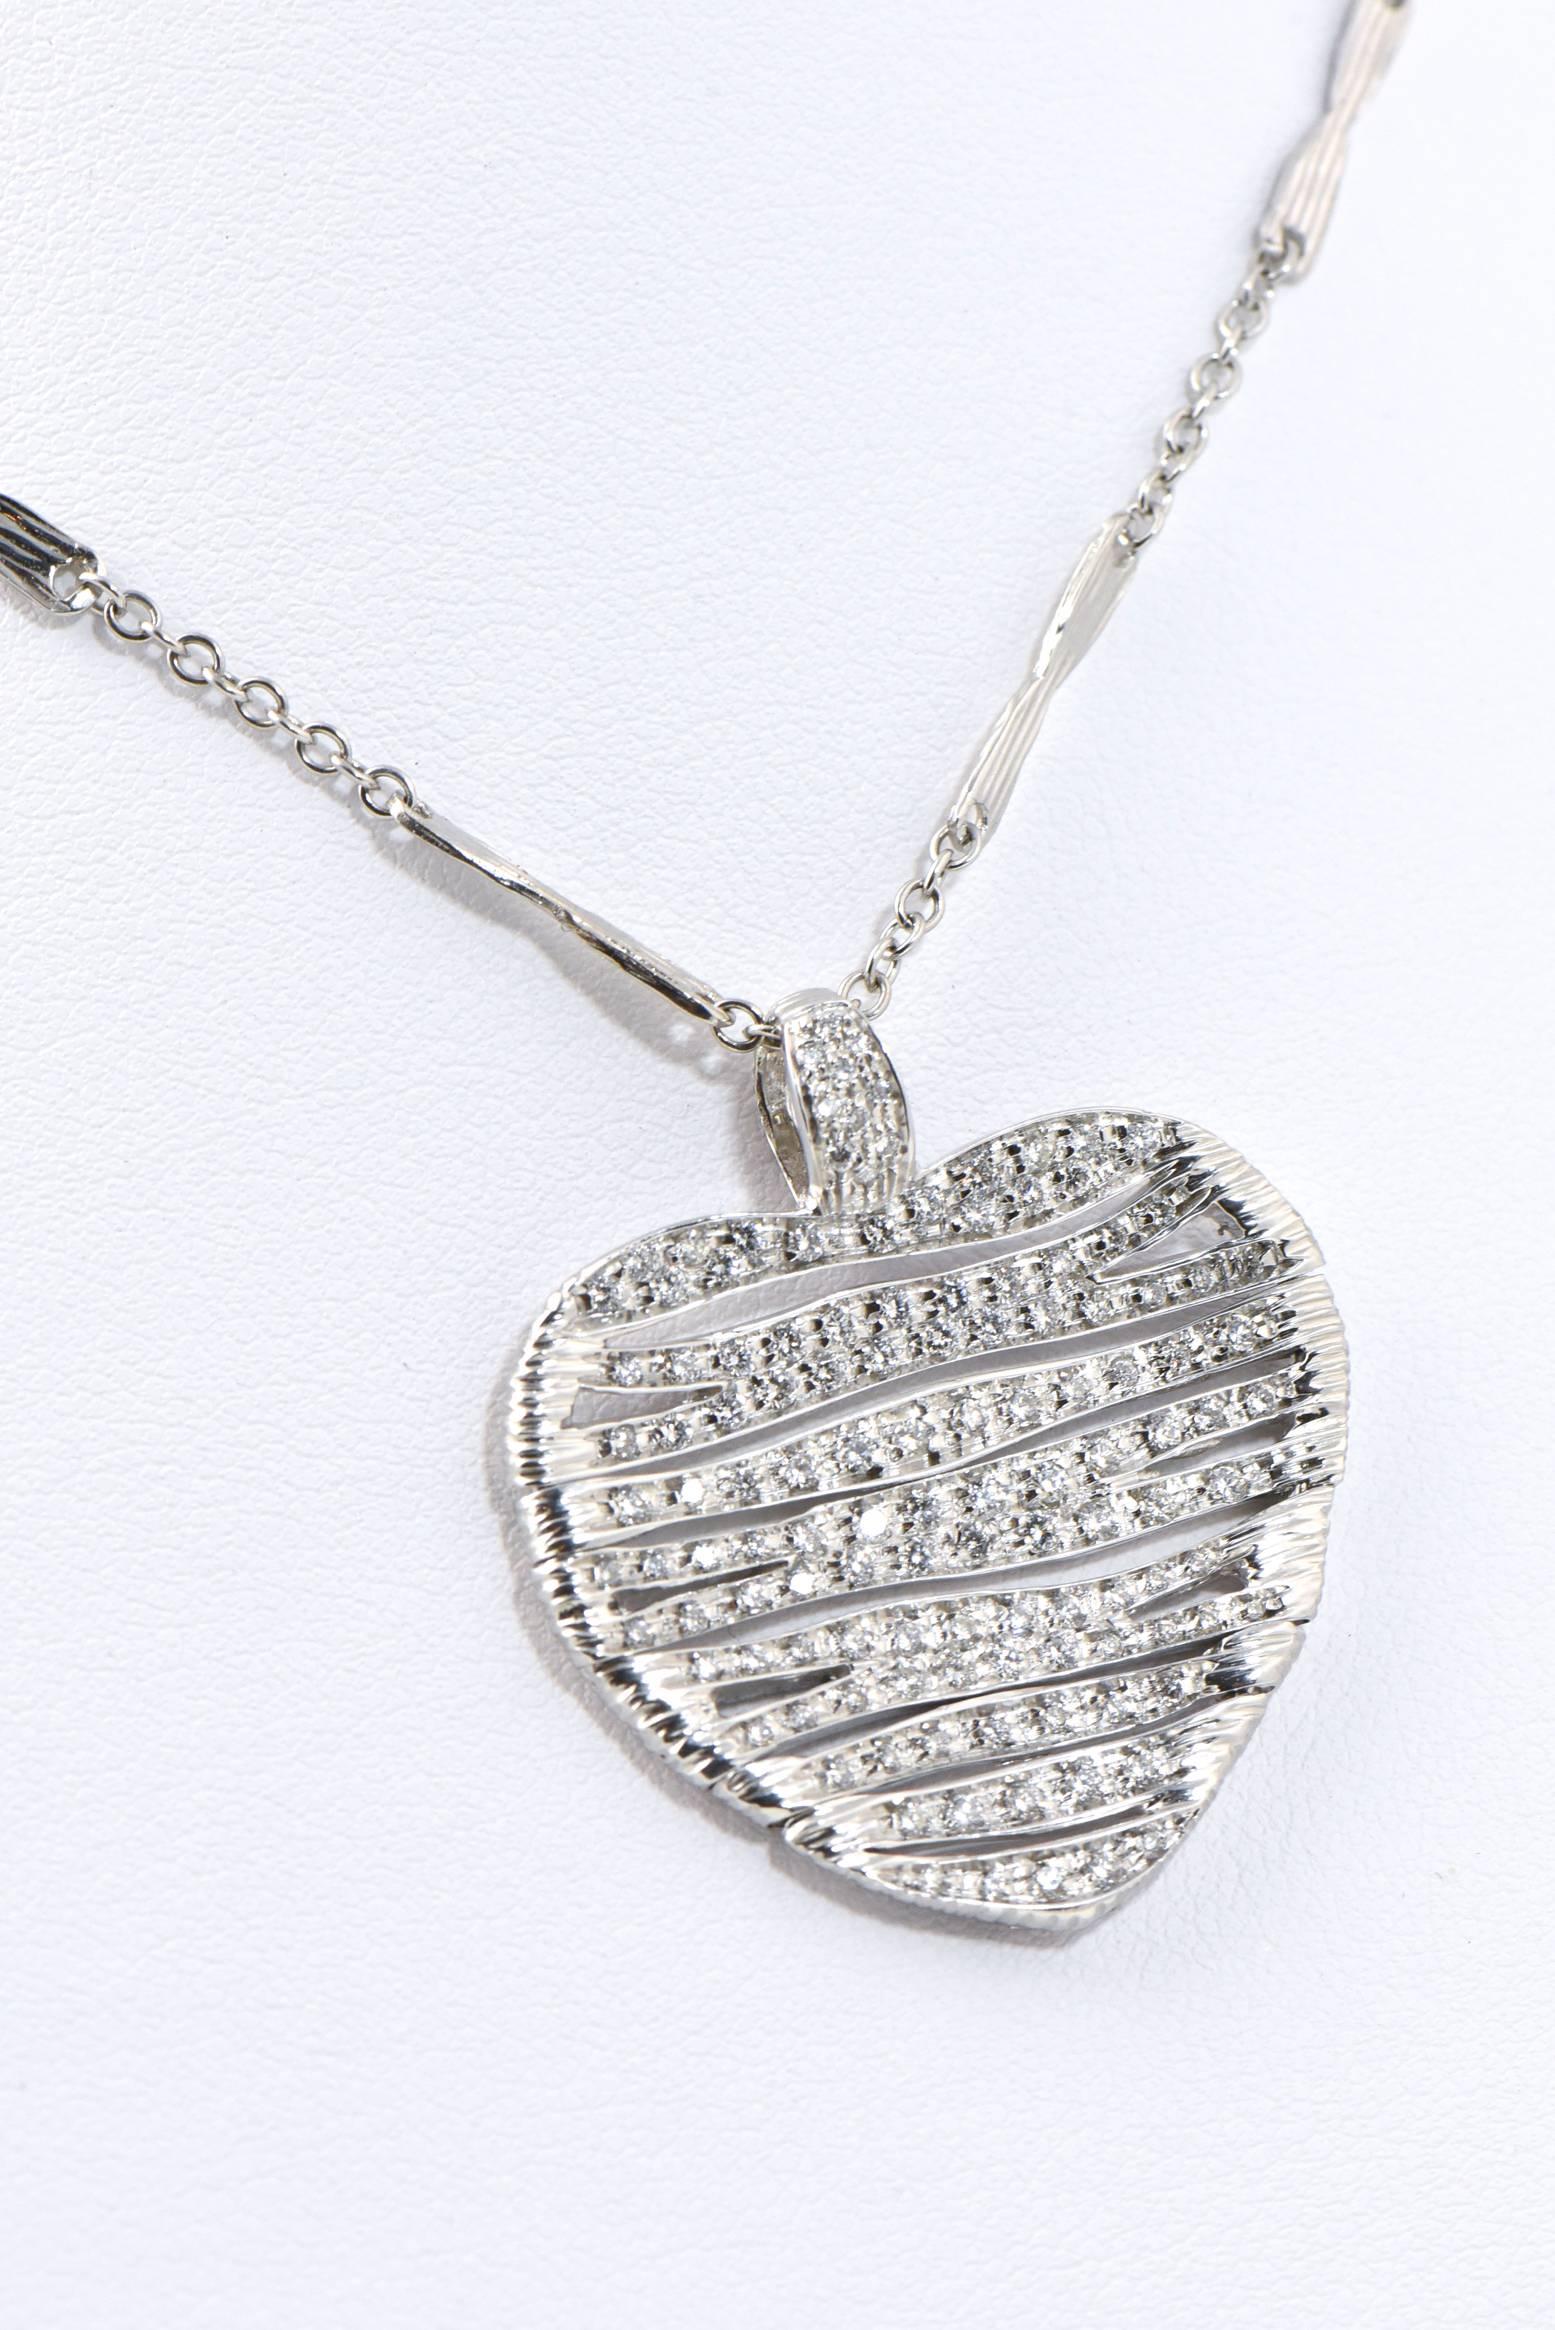 Roberto Coin Diamond Gold Heart Necklace from Elefantino Collection 3